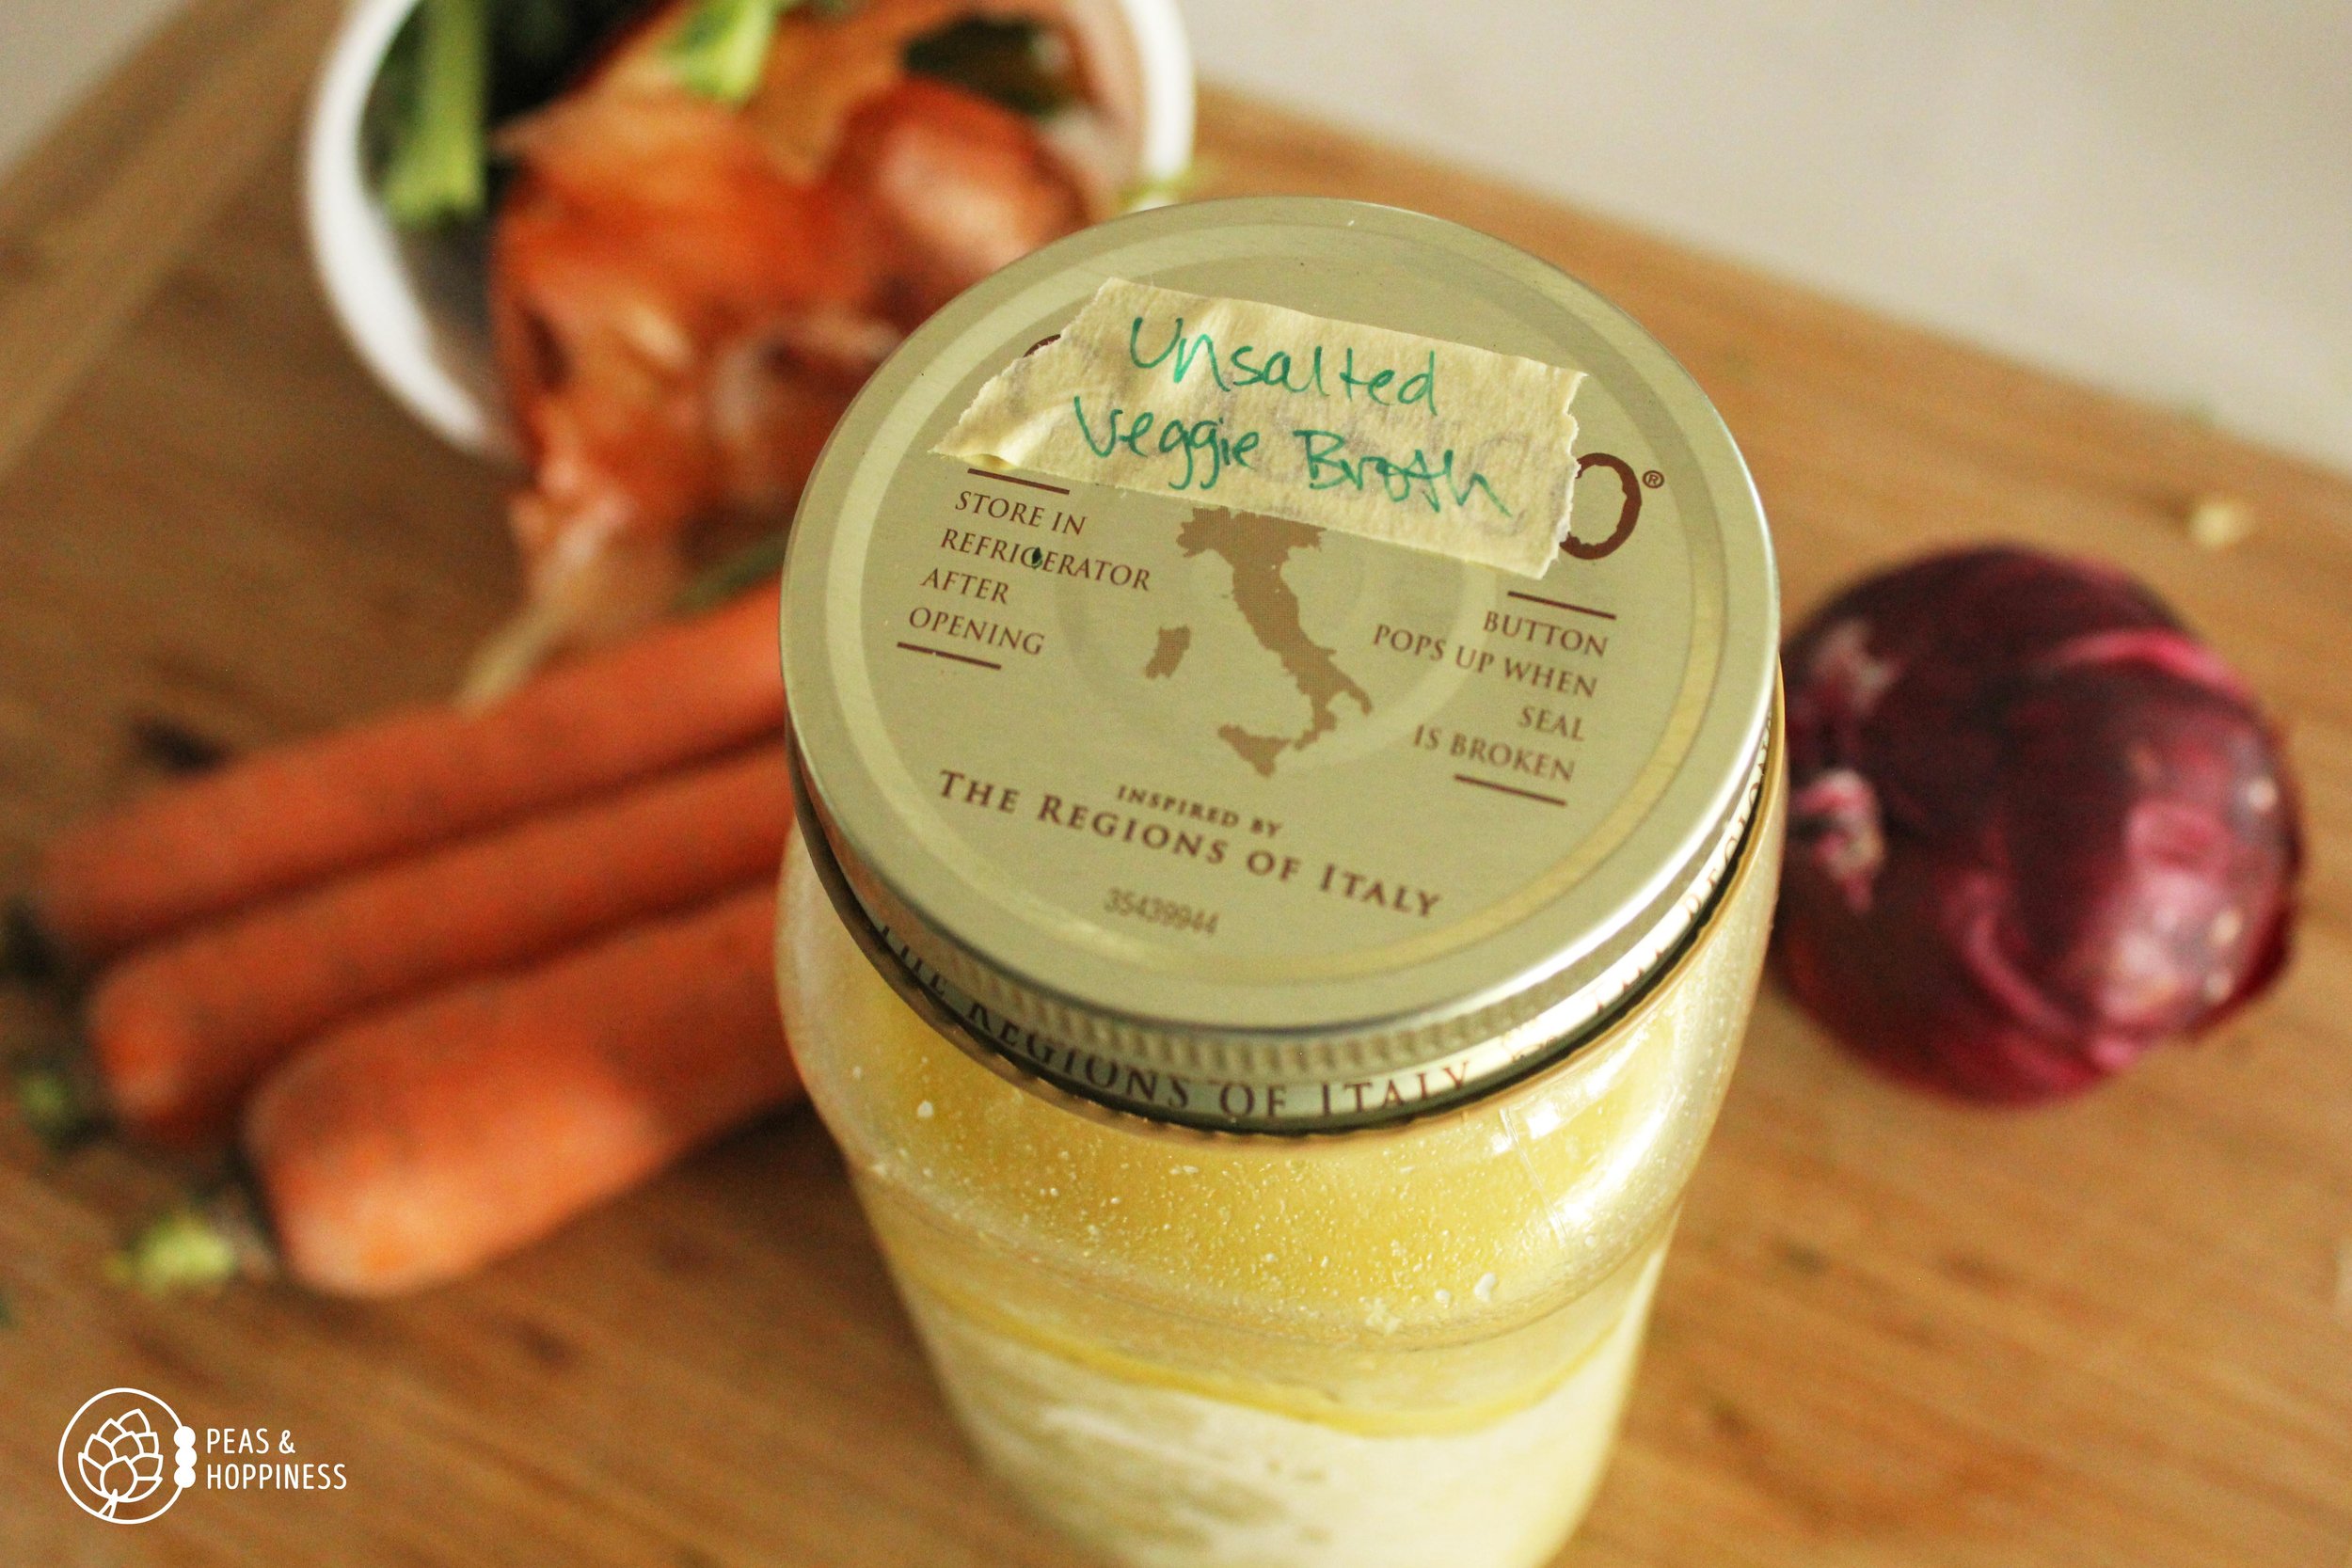 Mason jar with label on the lid that reads "Unsalted Veggie Broth" with vegetables scraps laying on a cutting board in the background